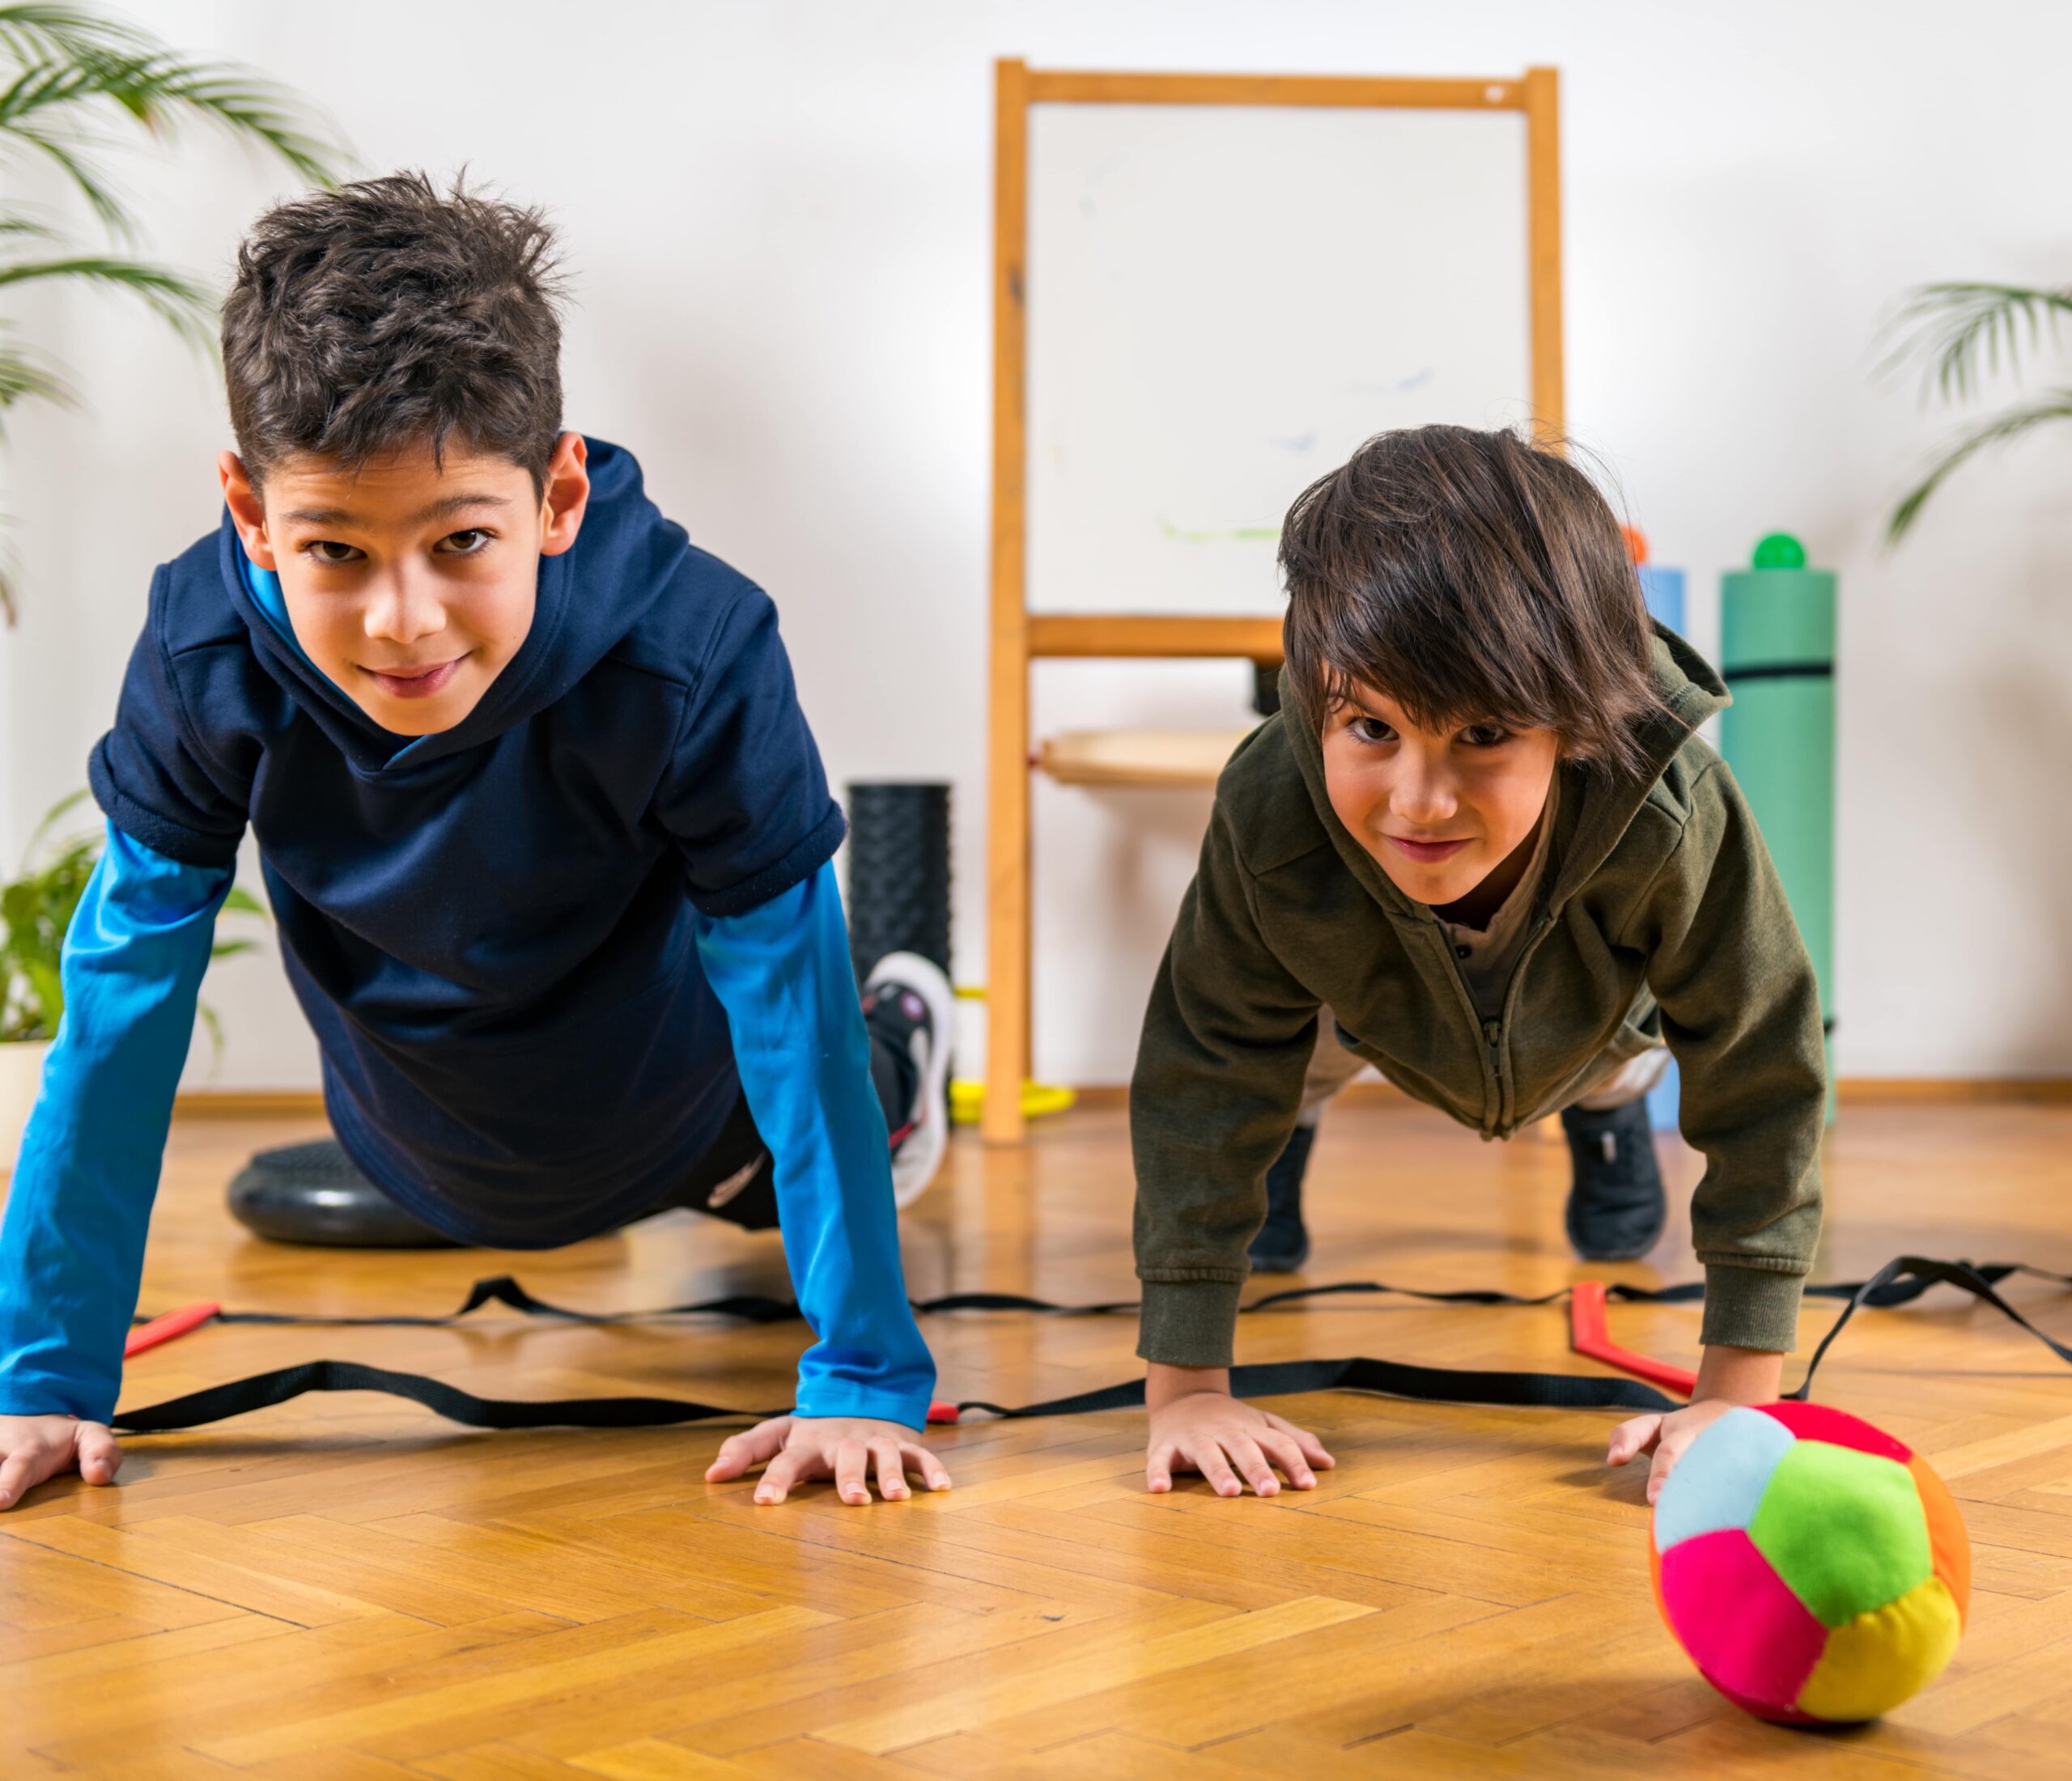 School children who took online Physical Education classes during Covid demonstrated better fitnessversus those who did not: Reveals Sportz Village survey